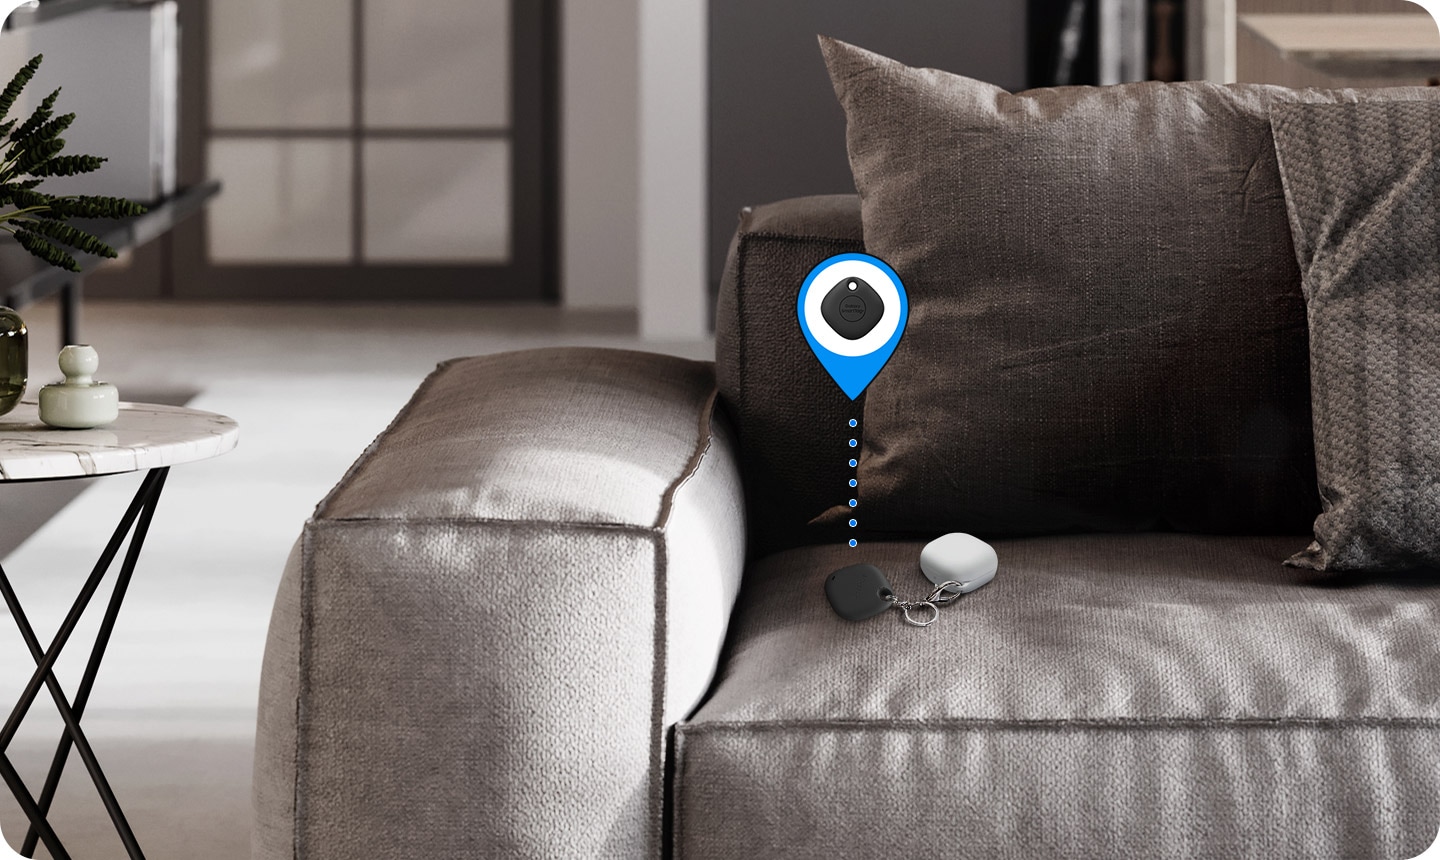 On a sofa, Galaxy Buds in the corner is seen with SmartTag+ attached. Virtual icon indicates that tag helps users find items.